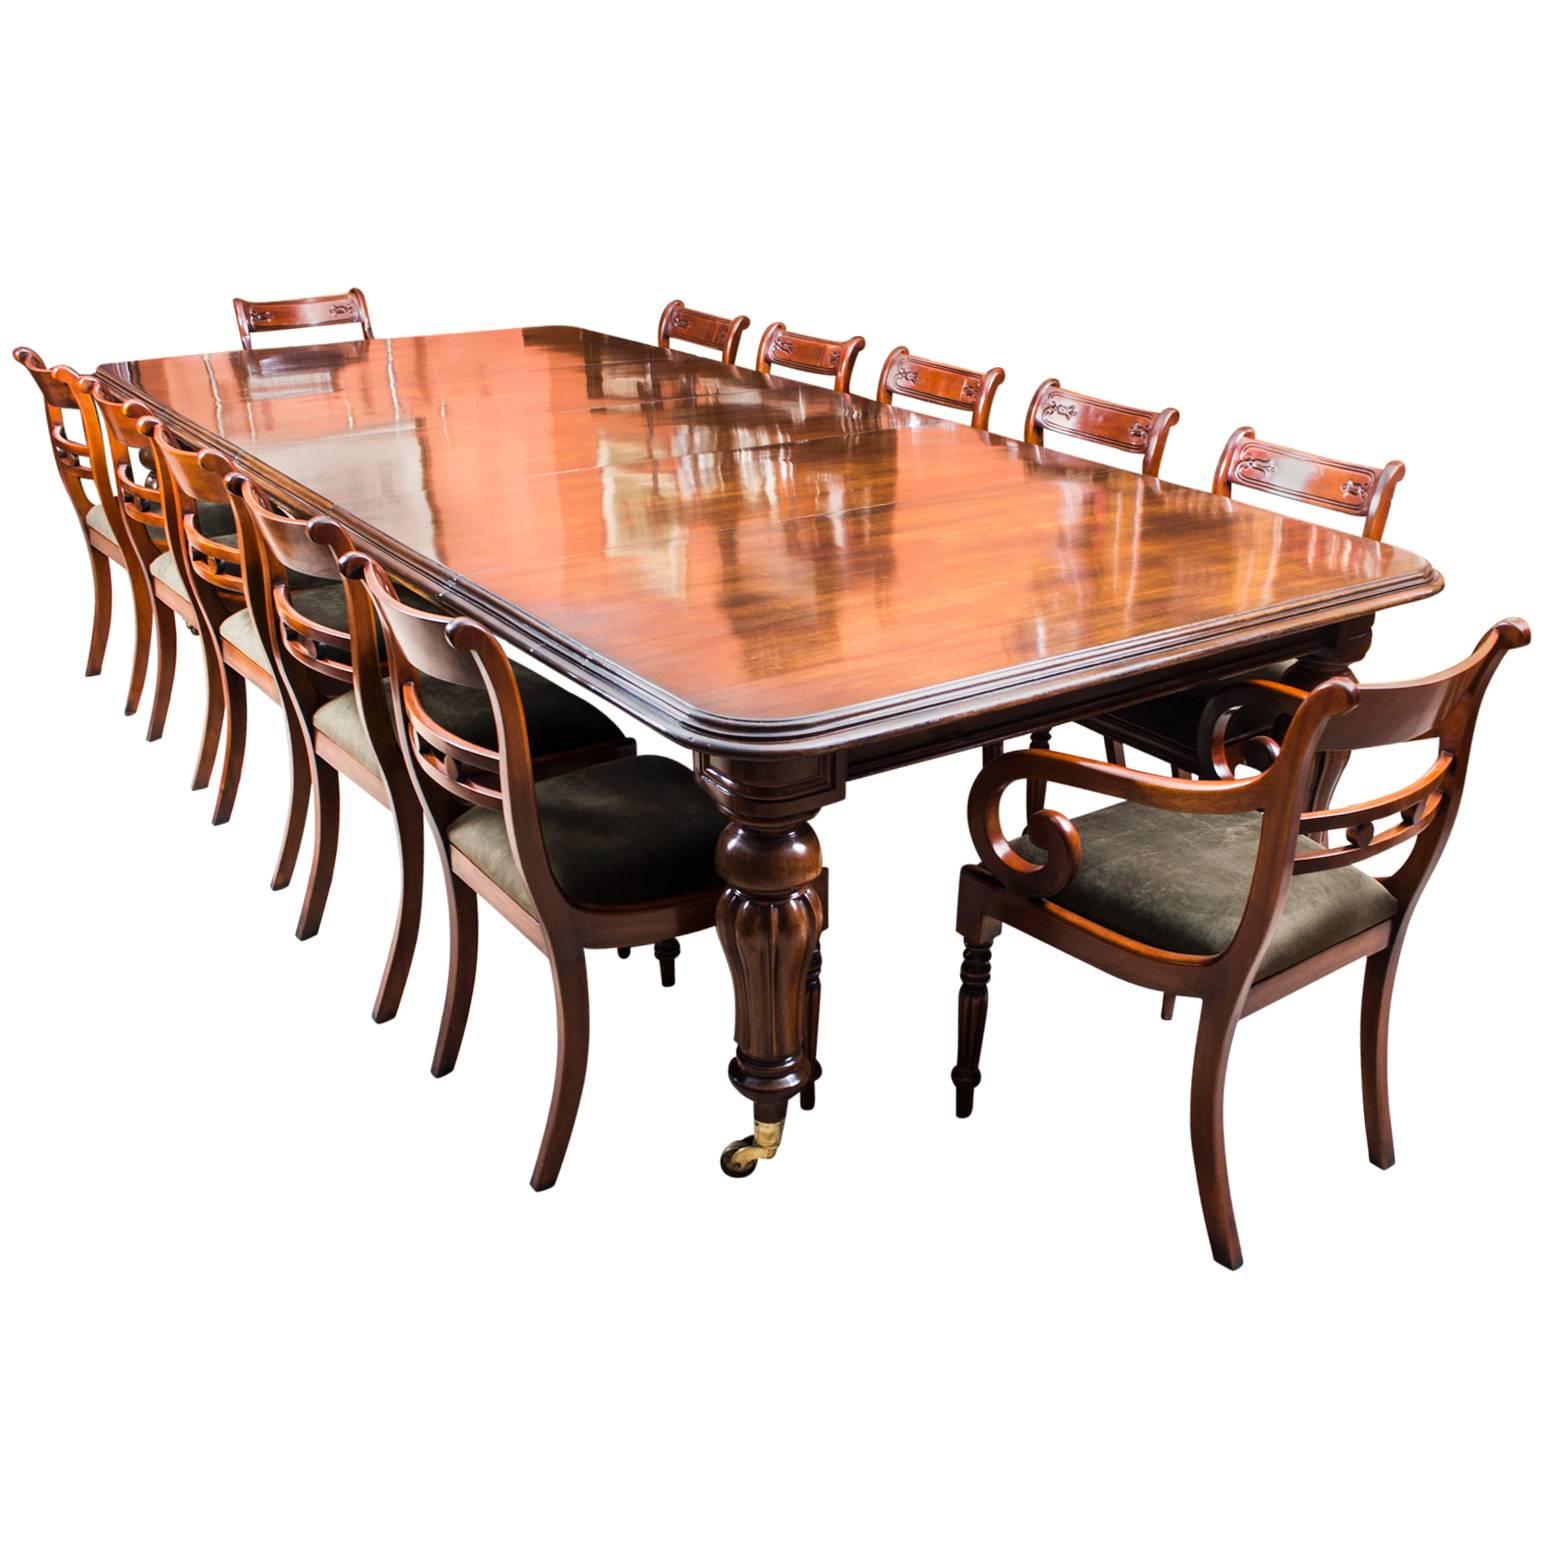 This is a superb large antique early Victorian dining table, circa 1850 in date, and bought on my last buying trip to Devon.

This amazing table is in really excellent condition, has four original leaves, can comfortably seat 12 people in comfort